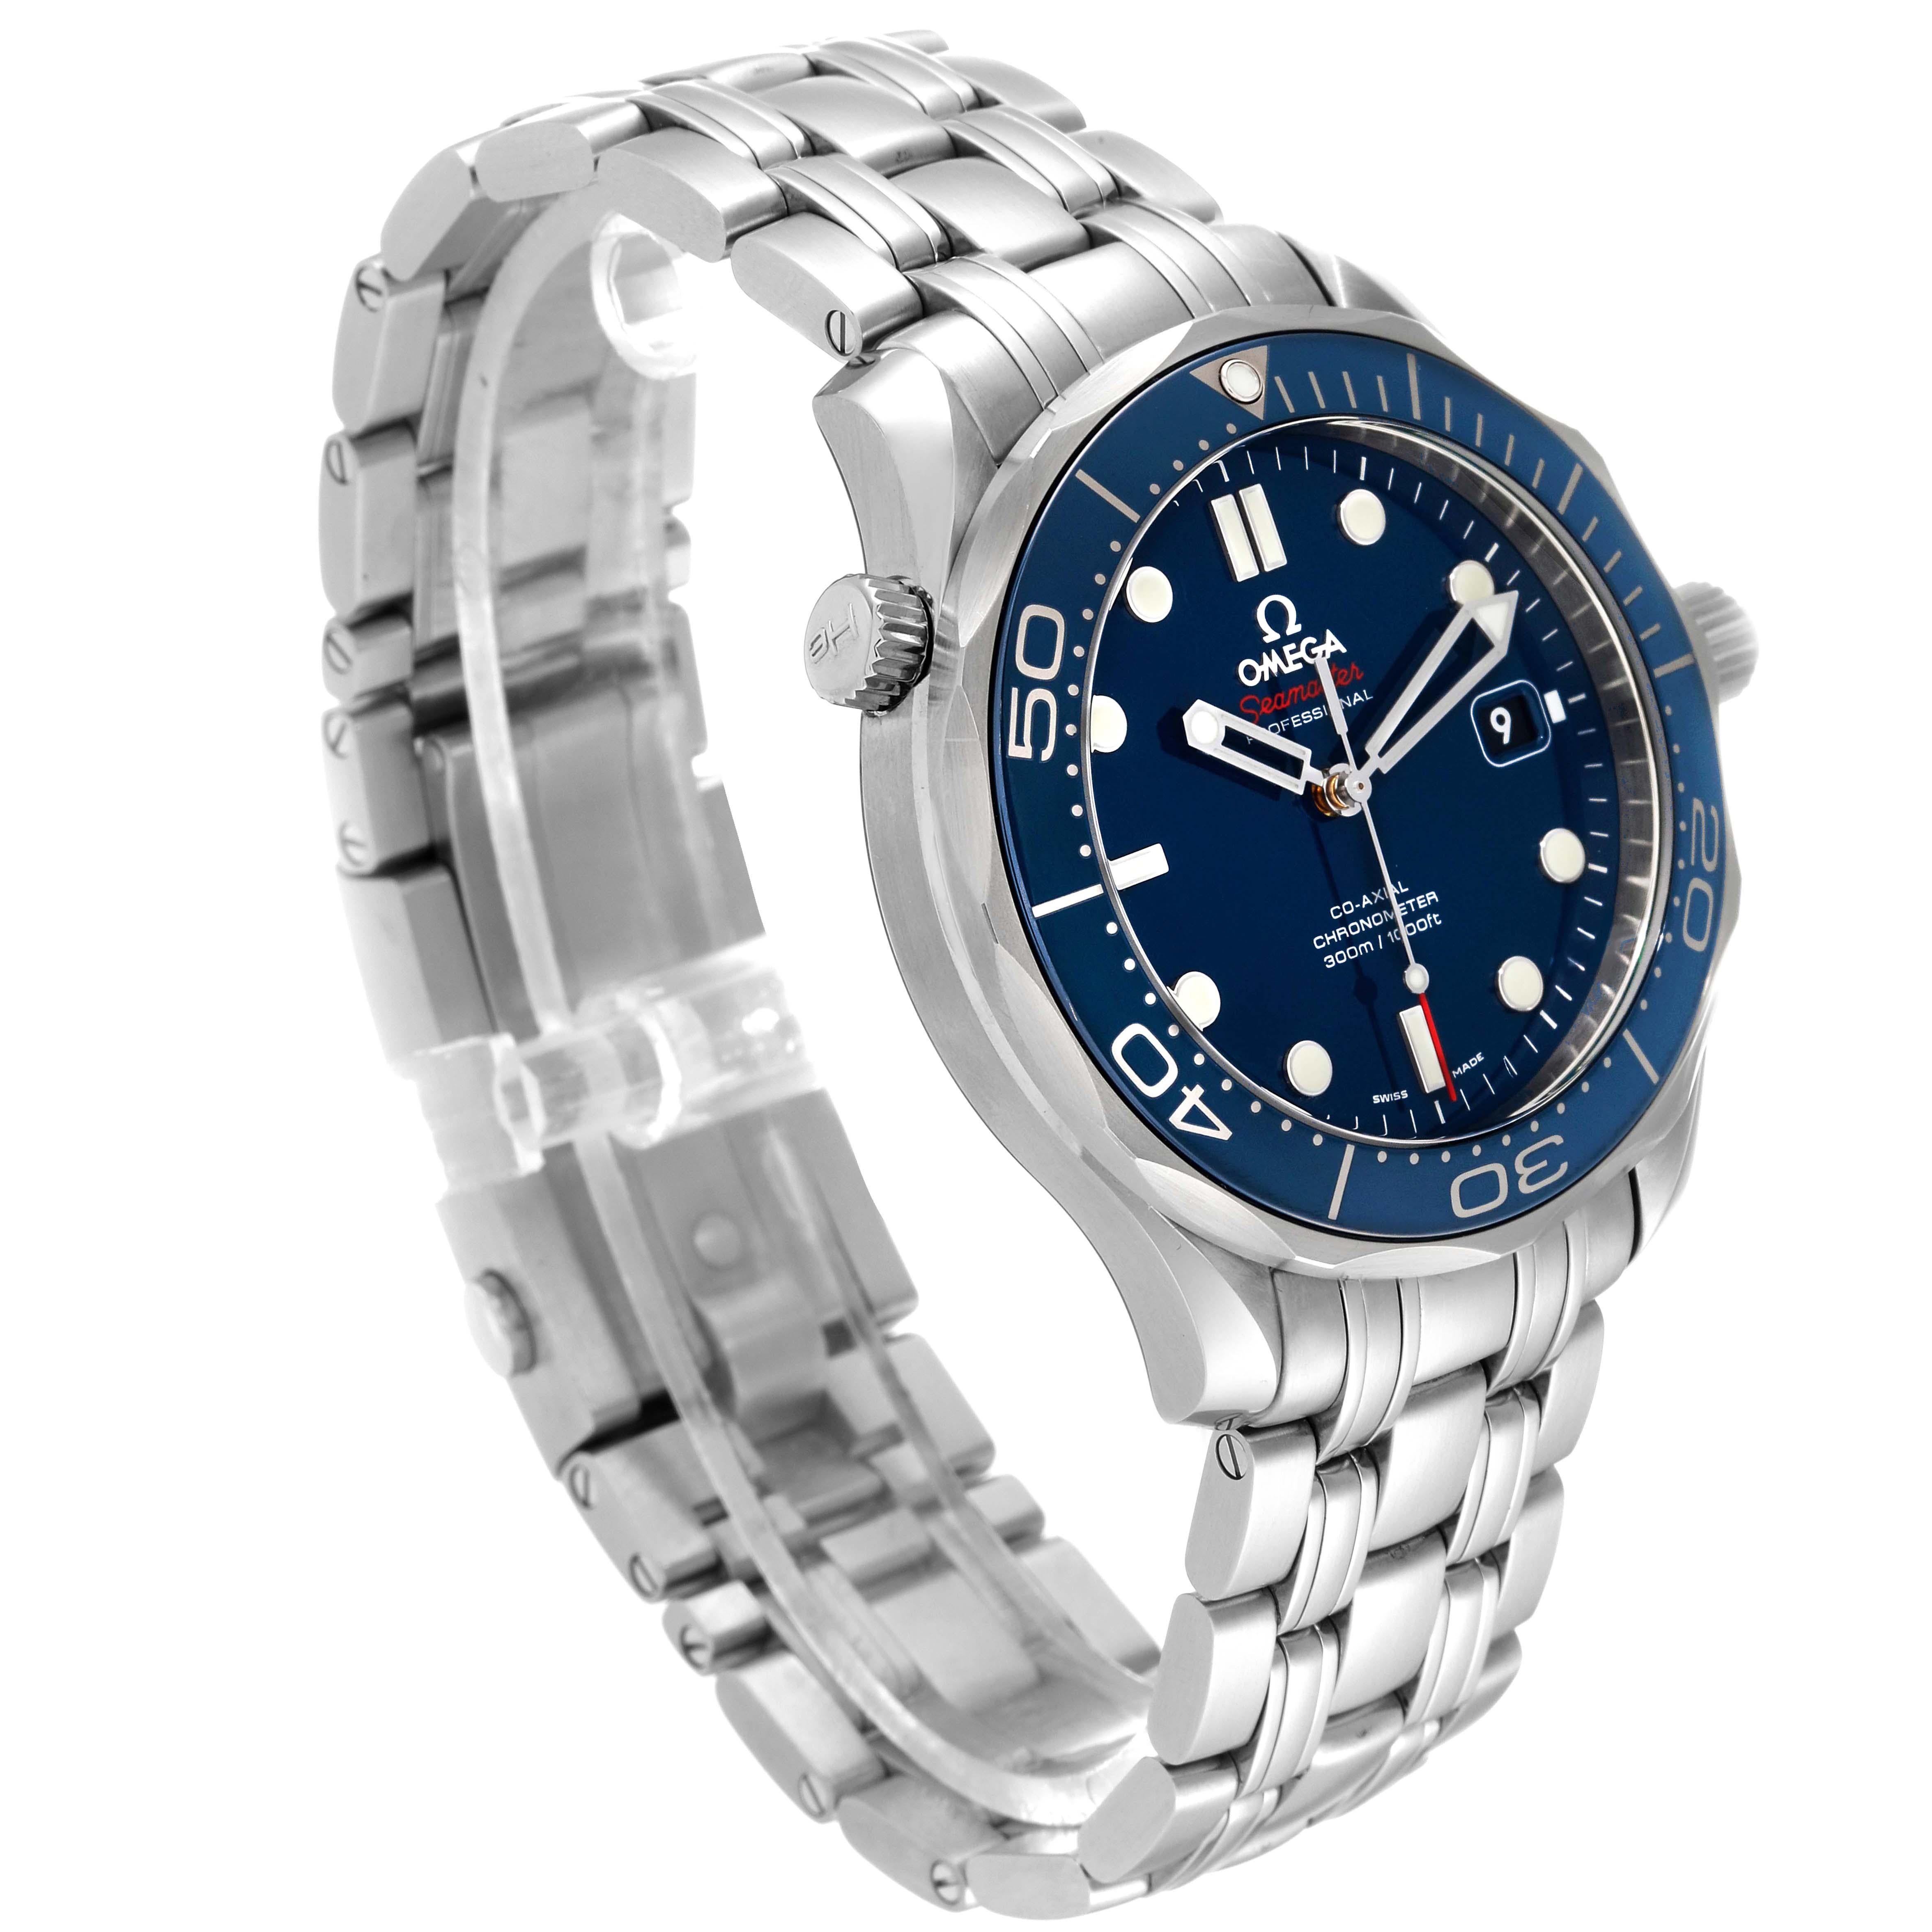 Omega Seamaster Diver 300M Steel Mens Watch 212.30.41.20.03.001 Box Card. Automatic self-winding chronometer, Co-Axial Escapement movement with rhodium-plated finish. Stainless steel case 41.0 mm in diameter. Helium escape valve at 10 o'clock. Omega